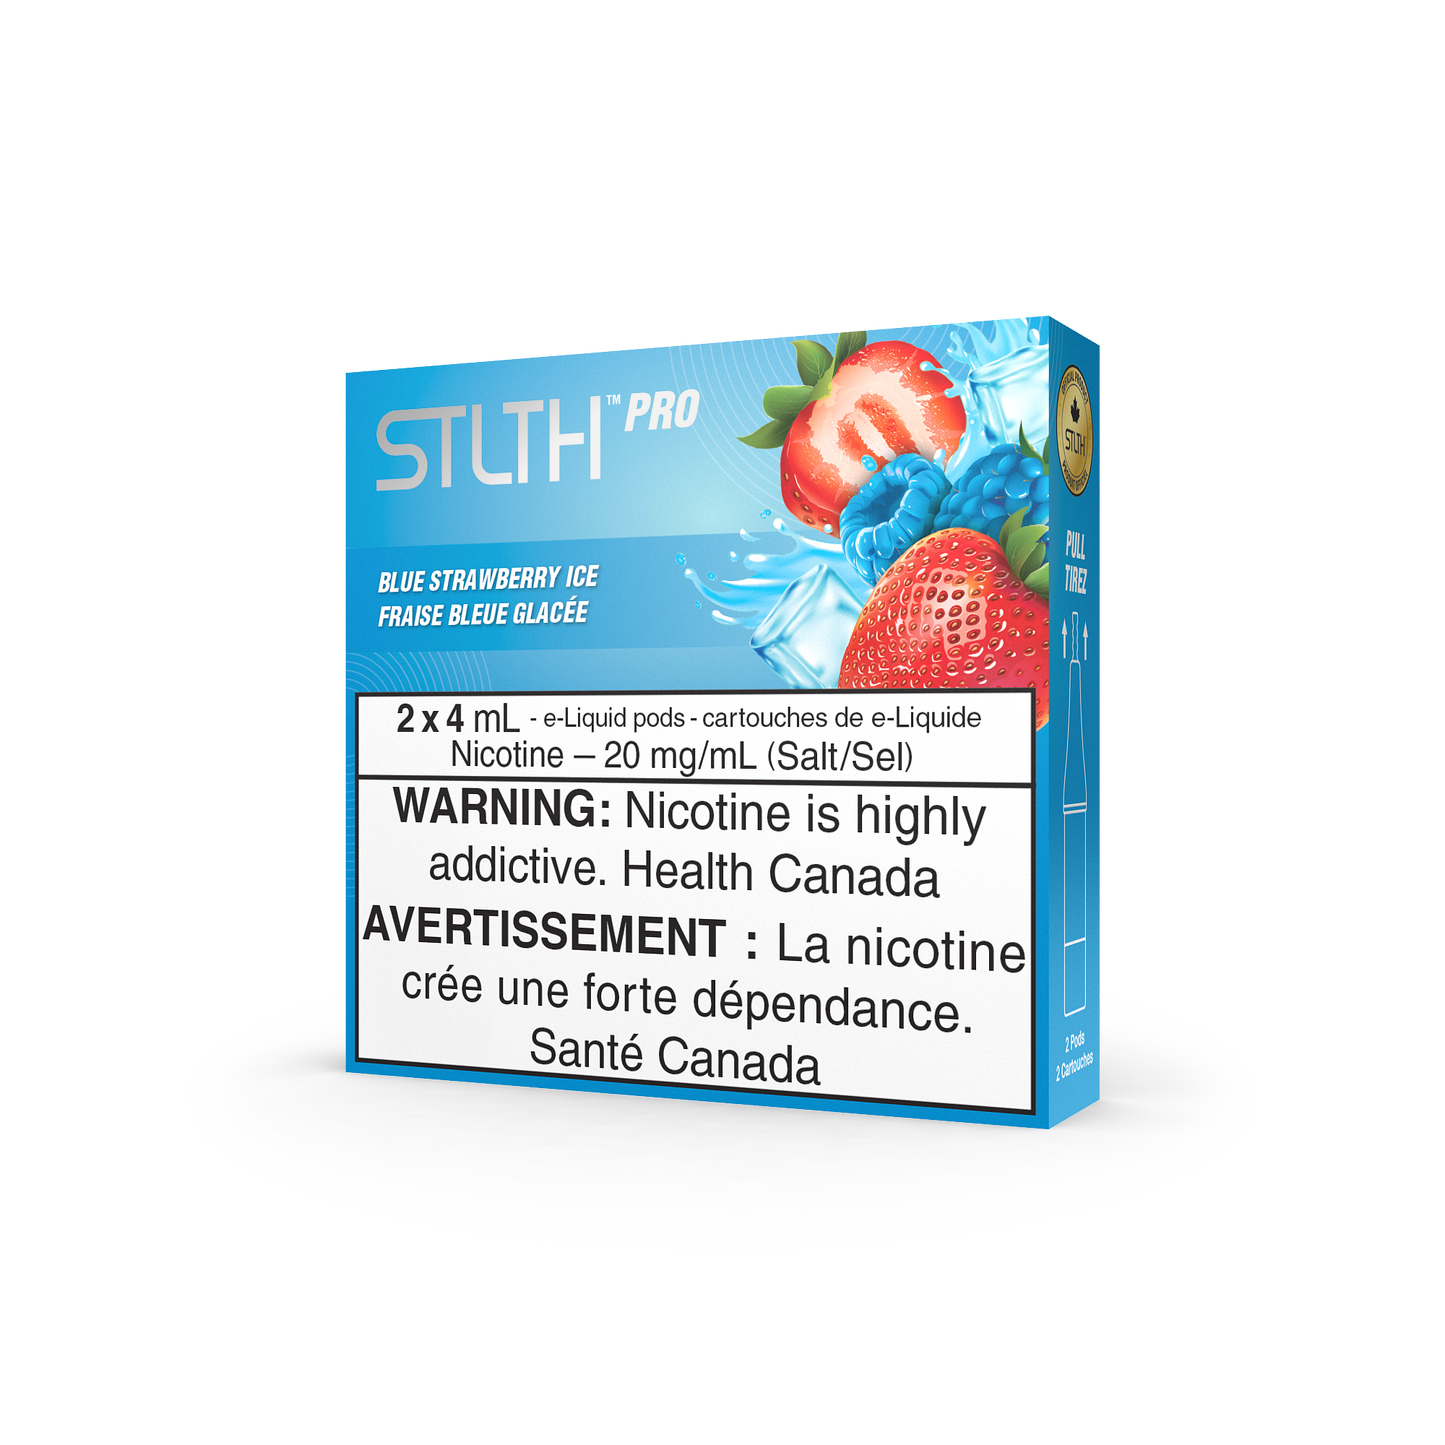 STLTH Pro - Blue Strawberry (Pack of 5)